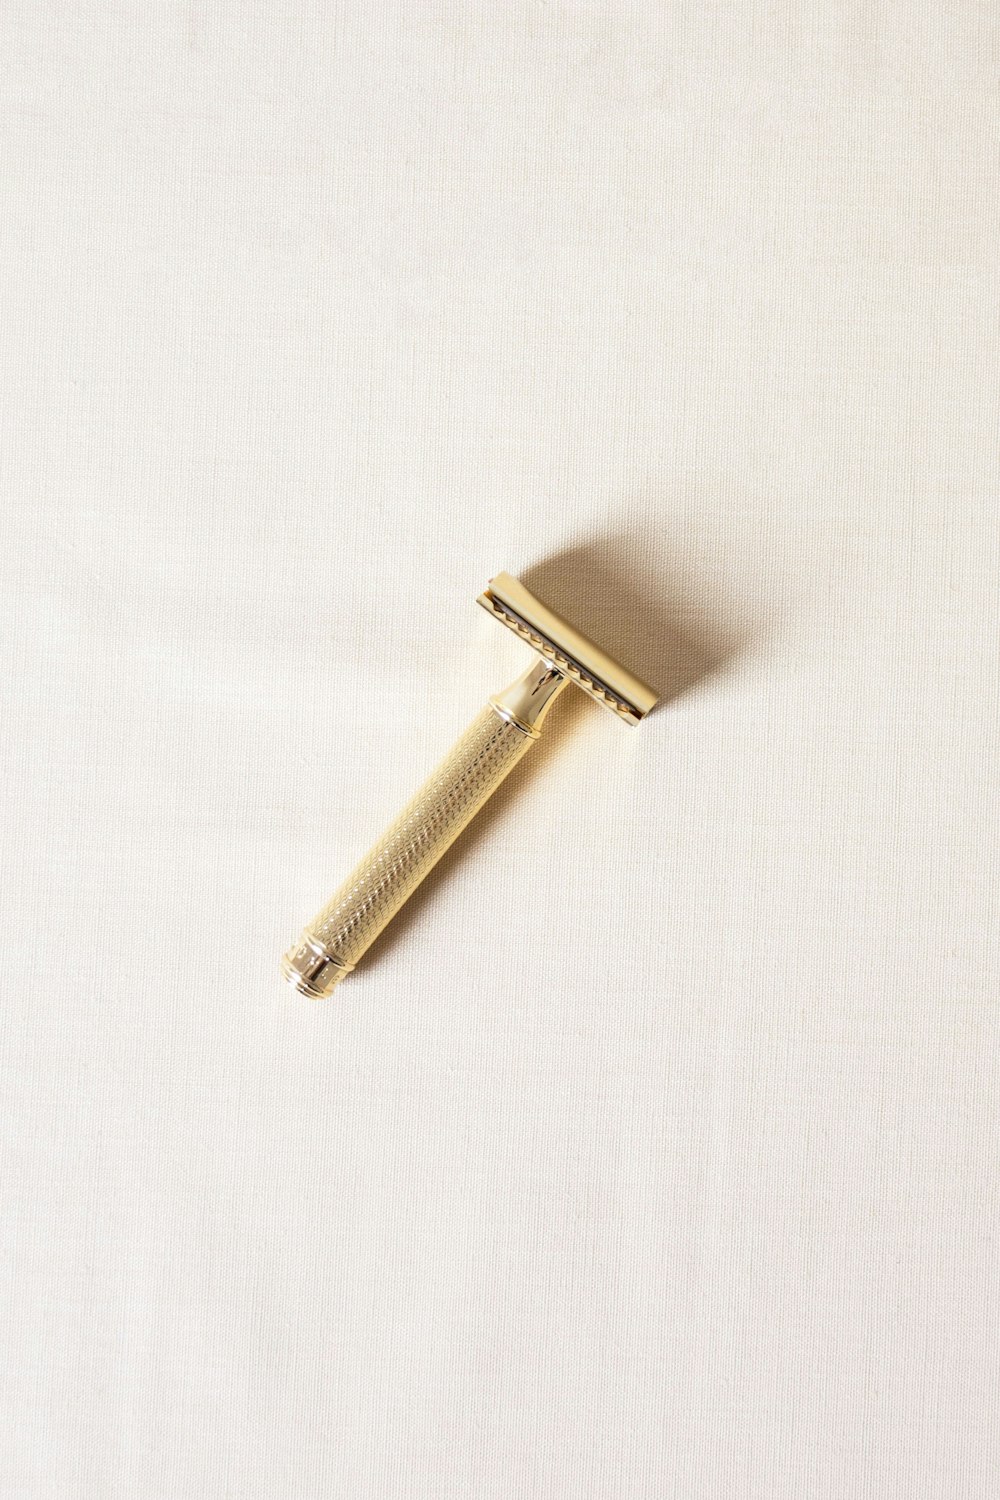 gold-color shaver on white surface